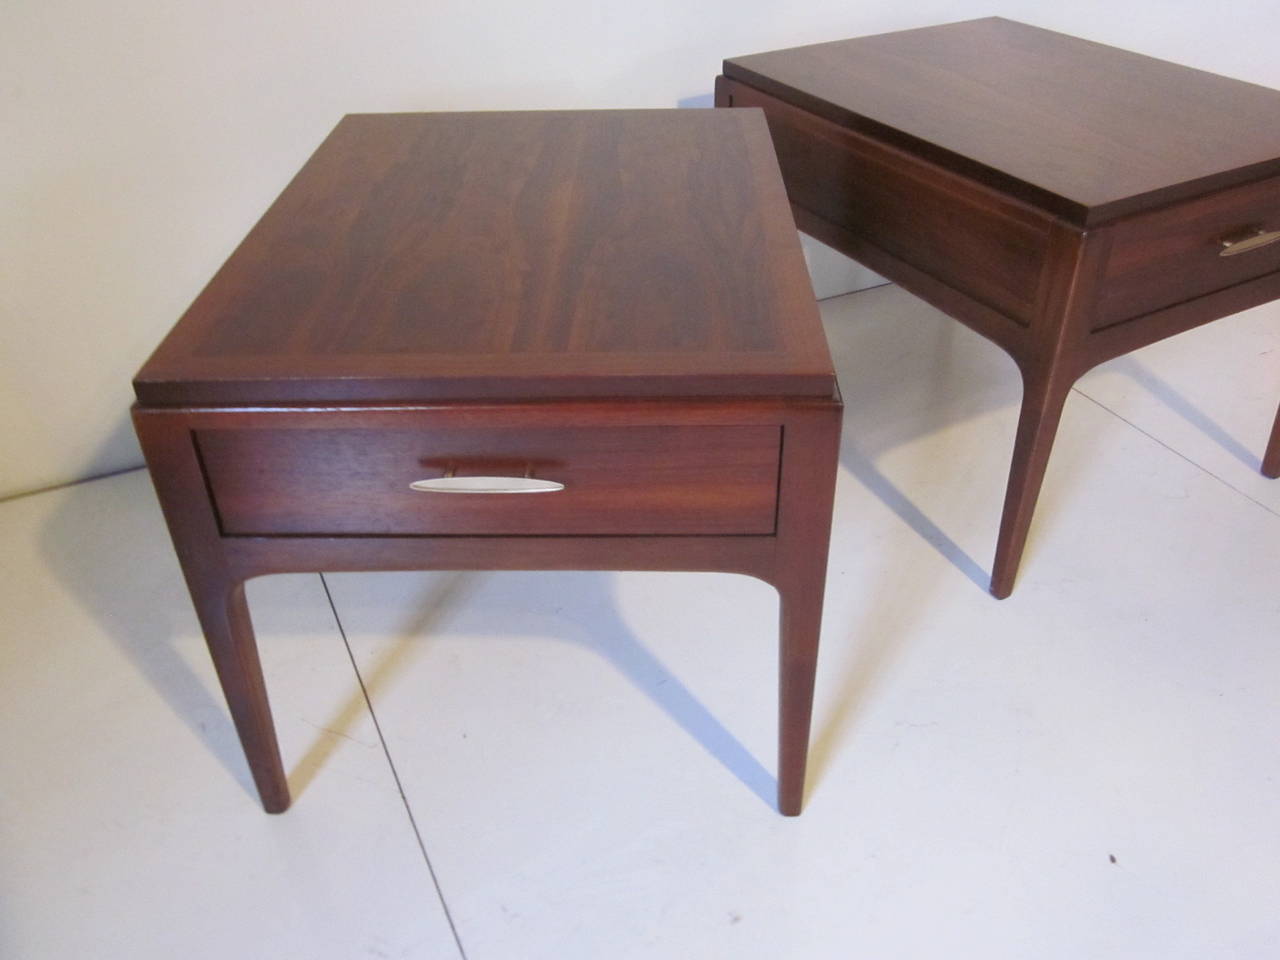 A pair of dark walnut nightstands or end tables with very well grained flamed walnut tops with a drawer to each complemented by brushed brass pulls.